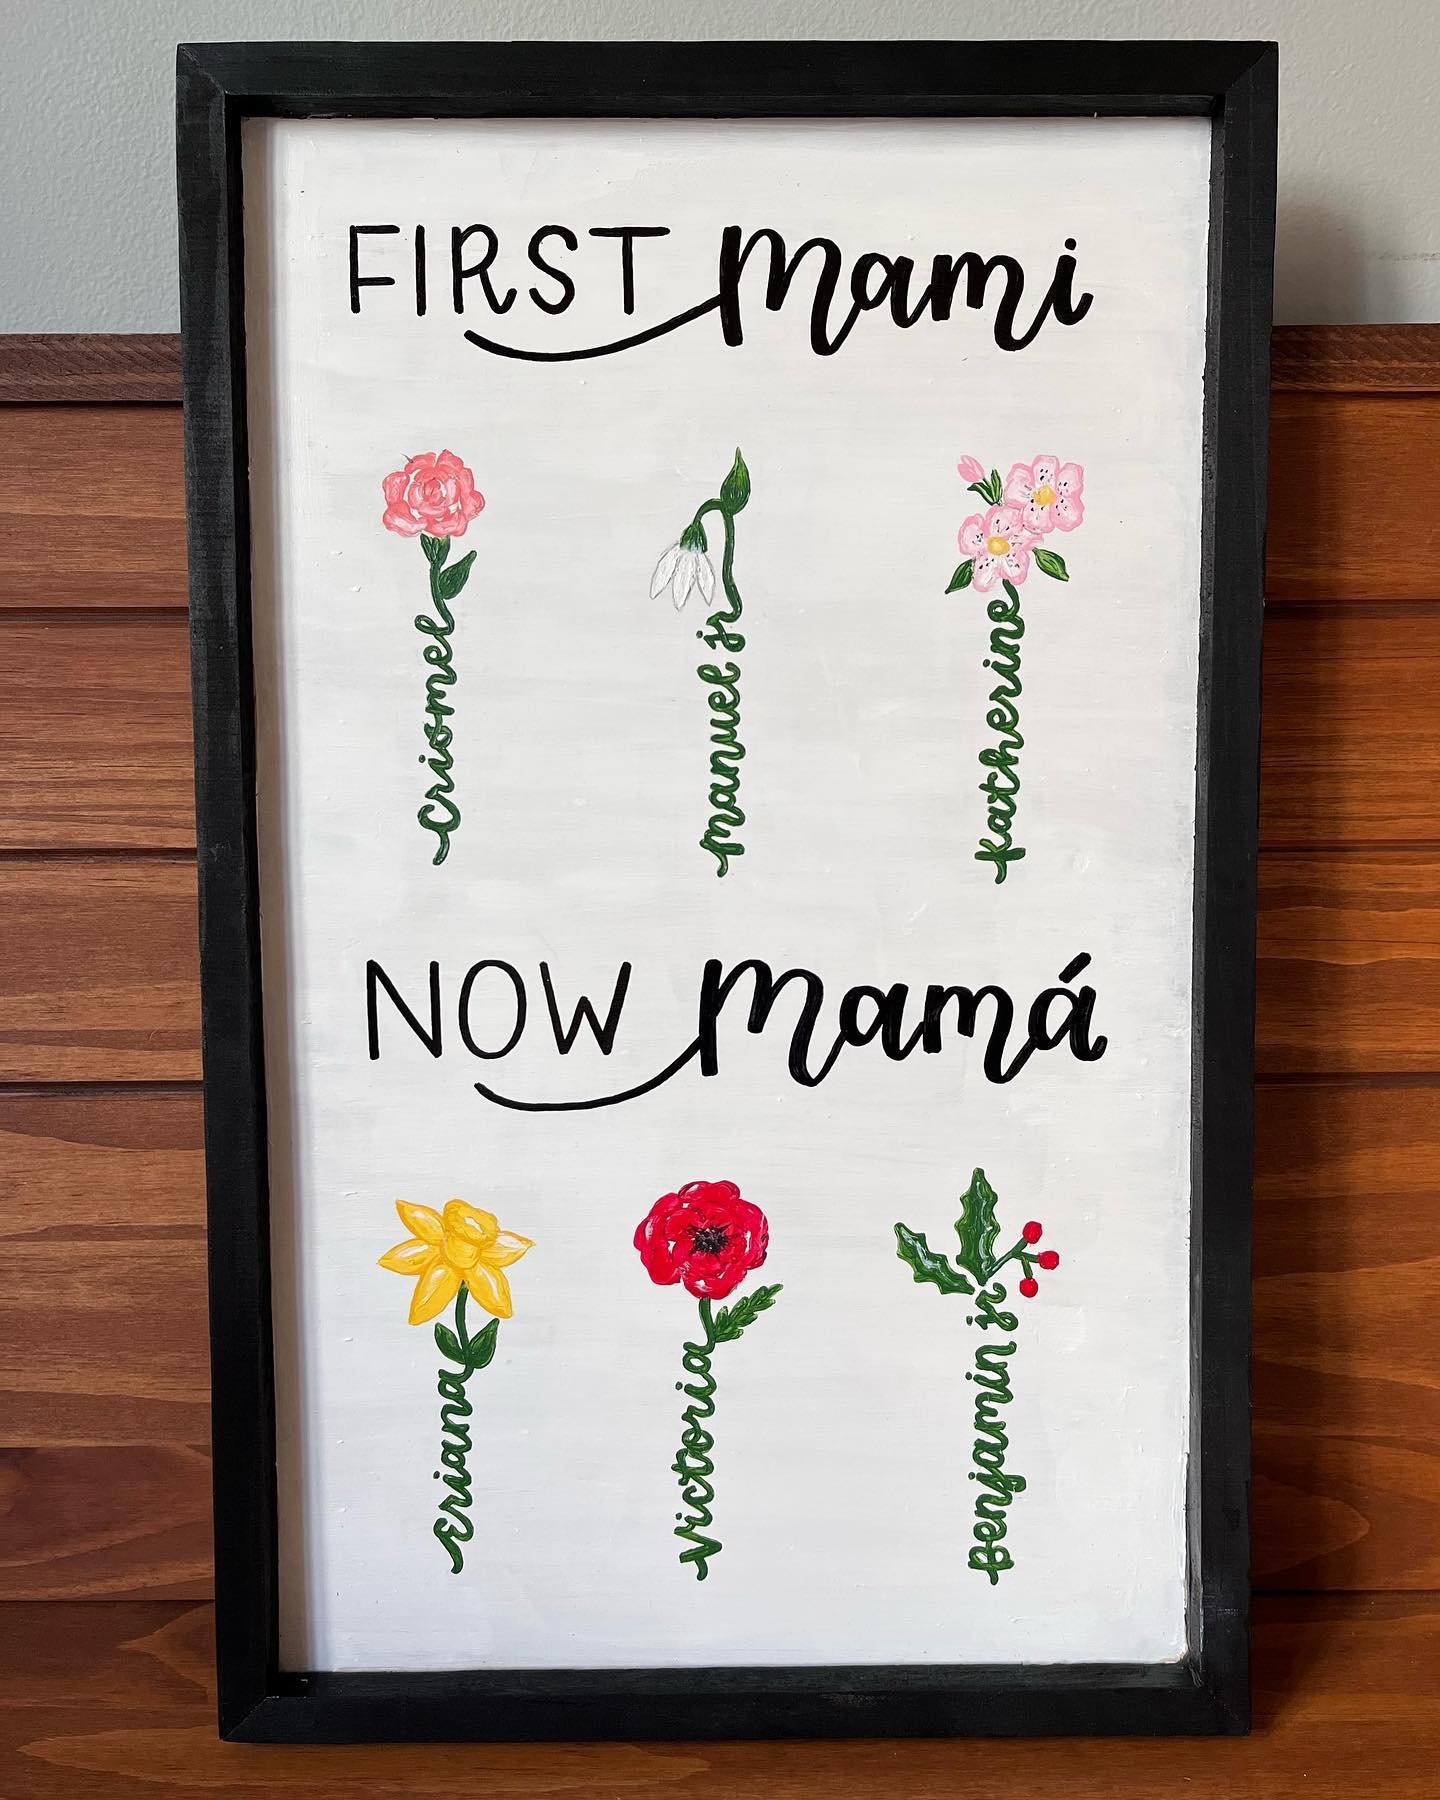 A Mother&rsquo;s Day gift with the birth flowers and names of a mother&rsquo;s children and grandchildren. Found this idea on Pinterest for inspiration 💐 
.
.
.
#mothersday #mama #handpainted #birthflower #handlettering #fyp #foryou #explorepage #ex